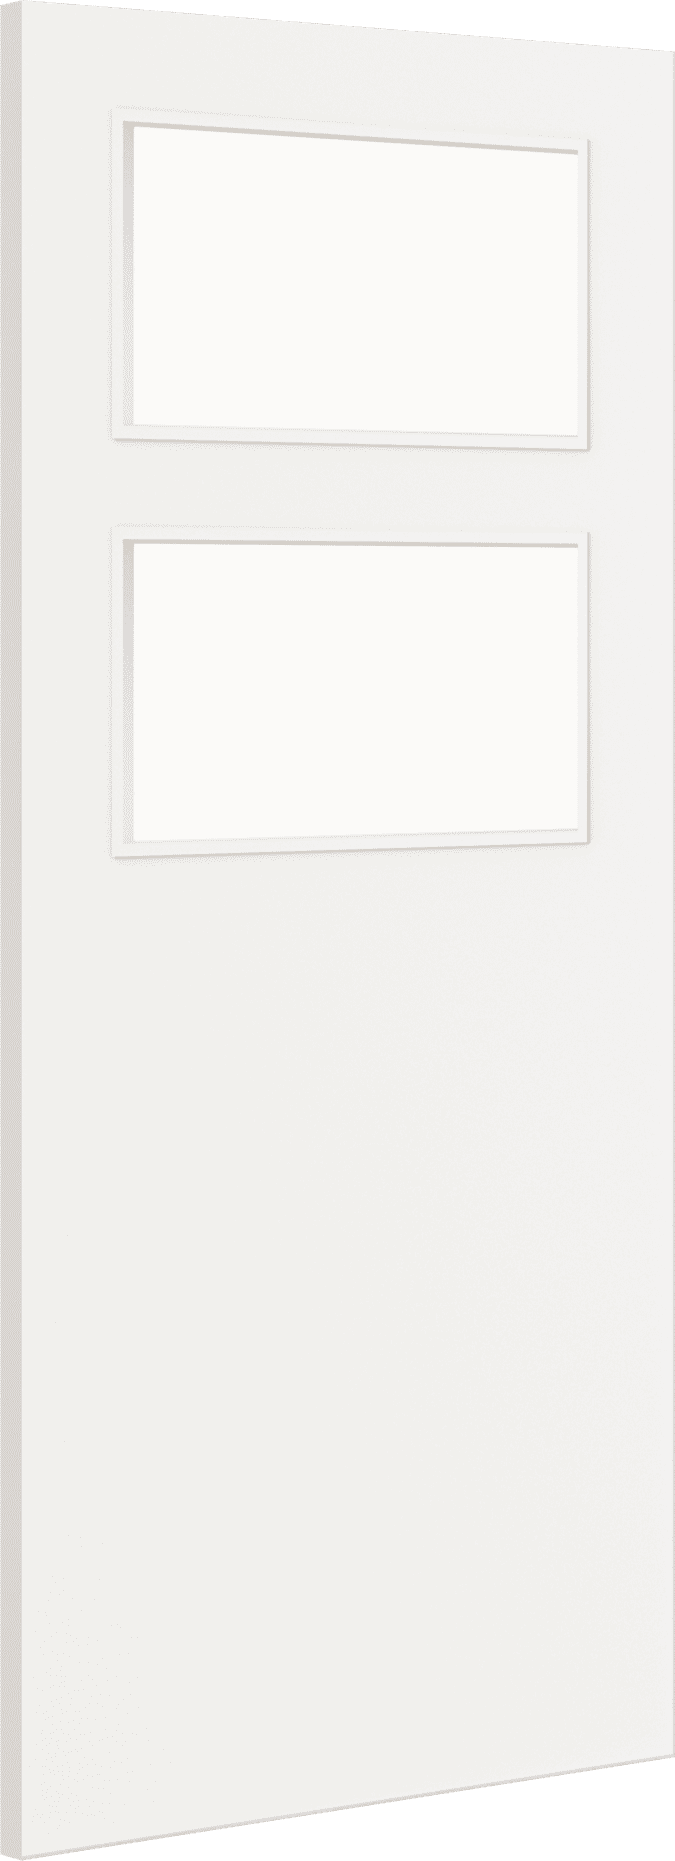 2040mm x 626mm x 44mm Architectural Paint Grade White 02 Frosted Glazed Fire Door Blank